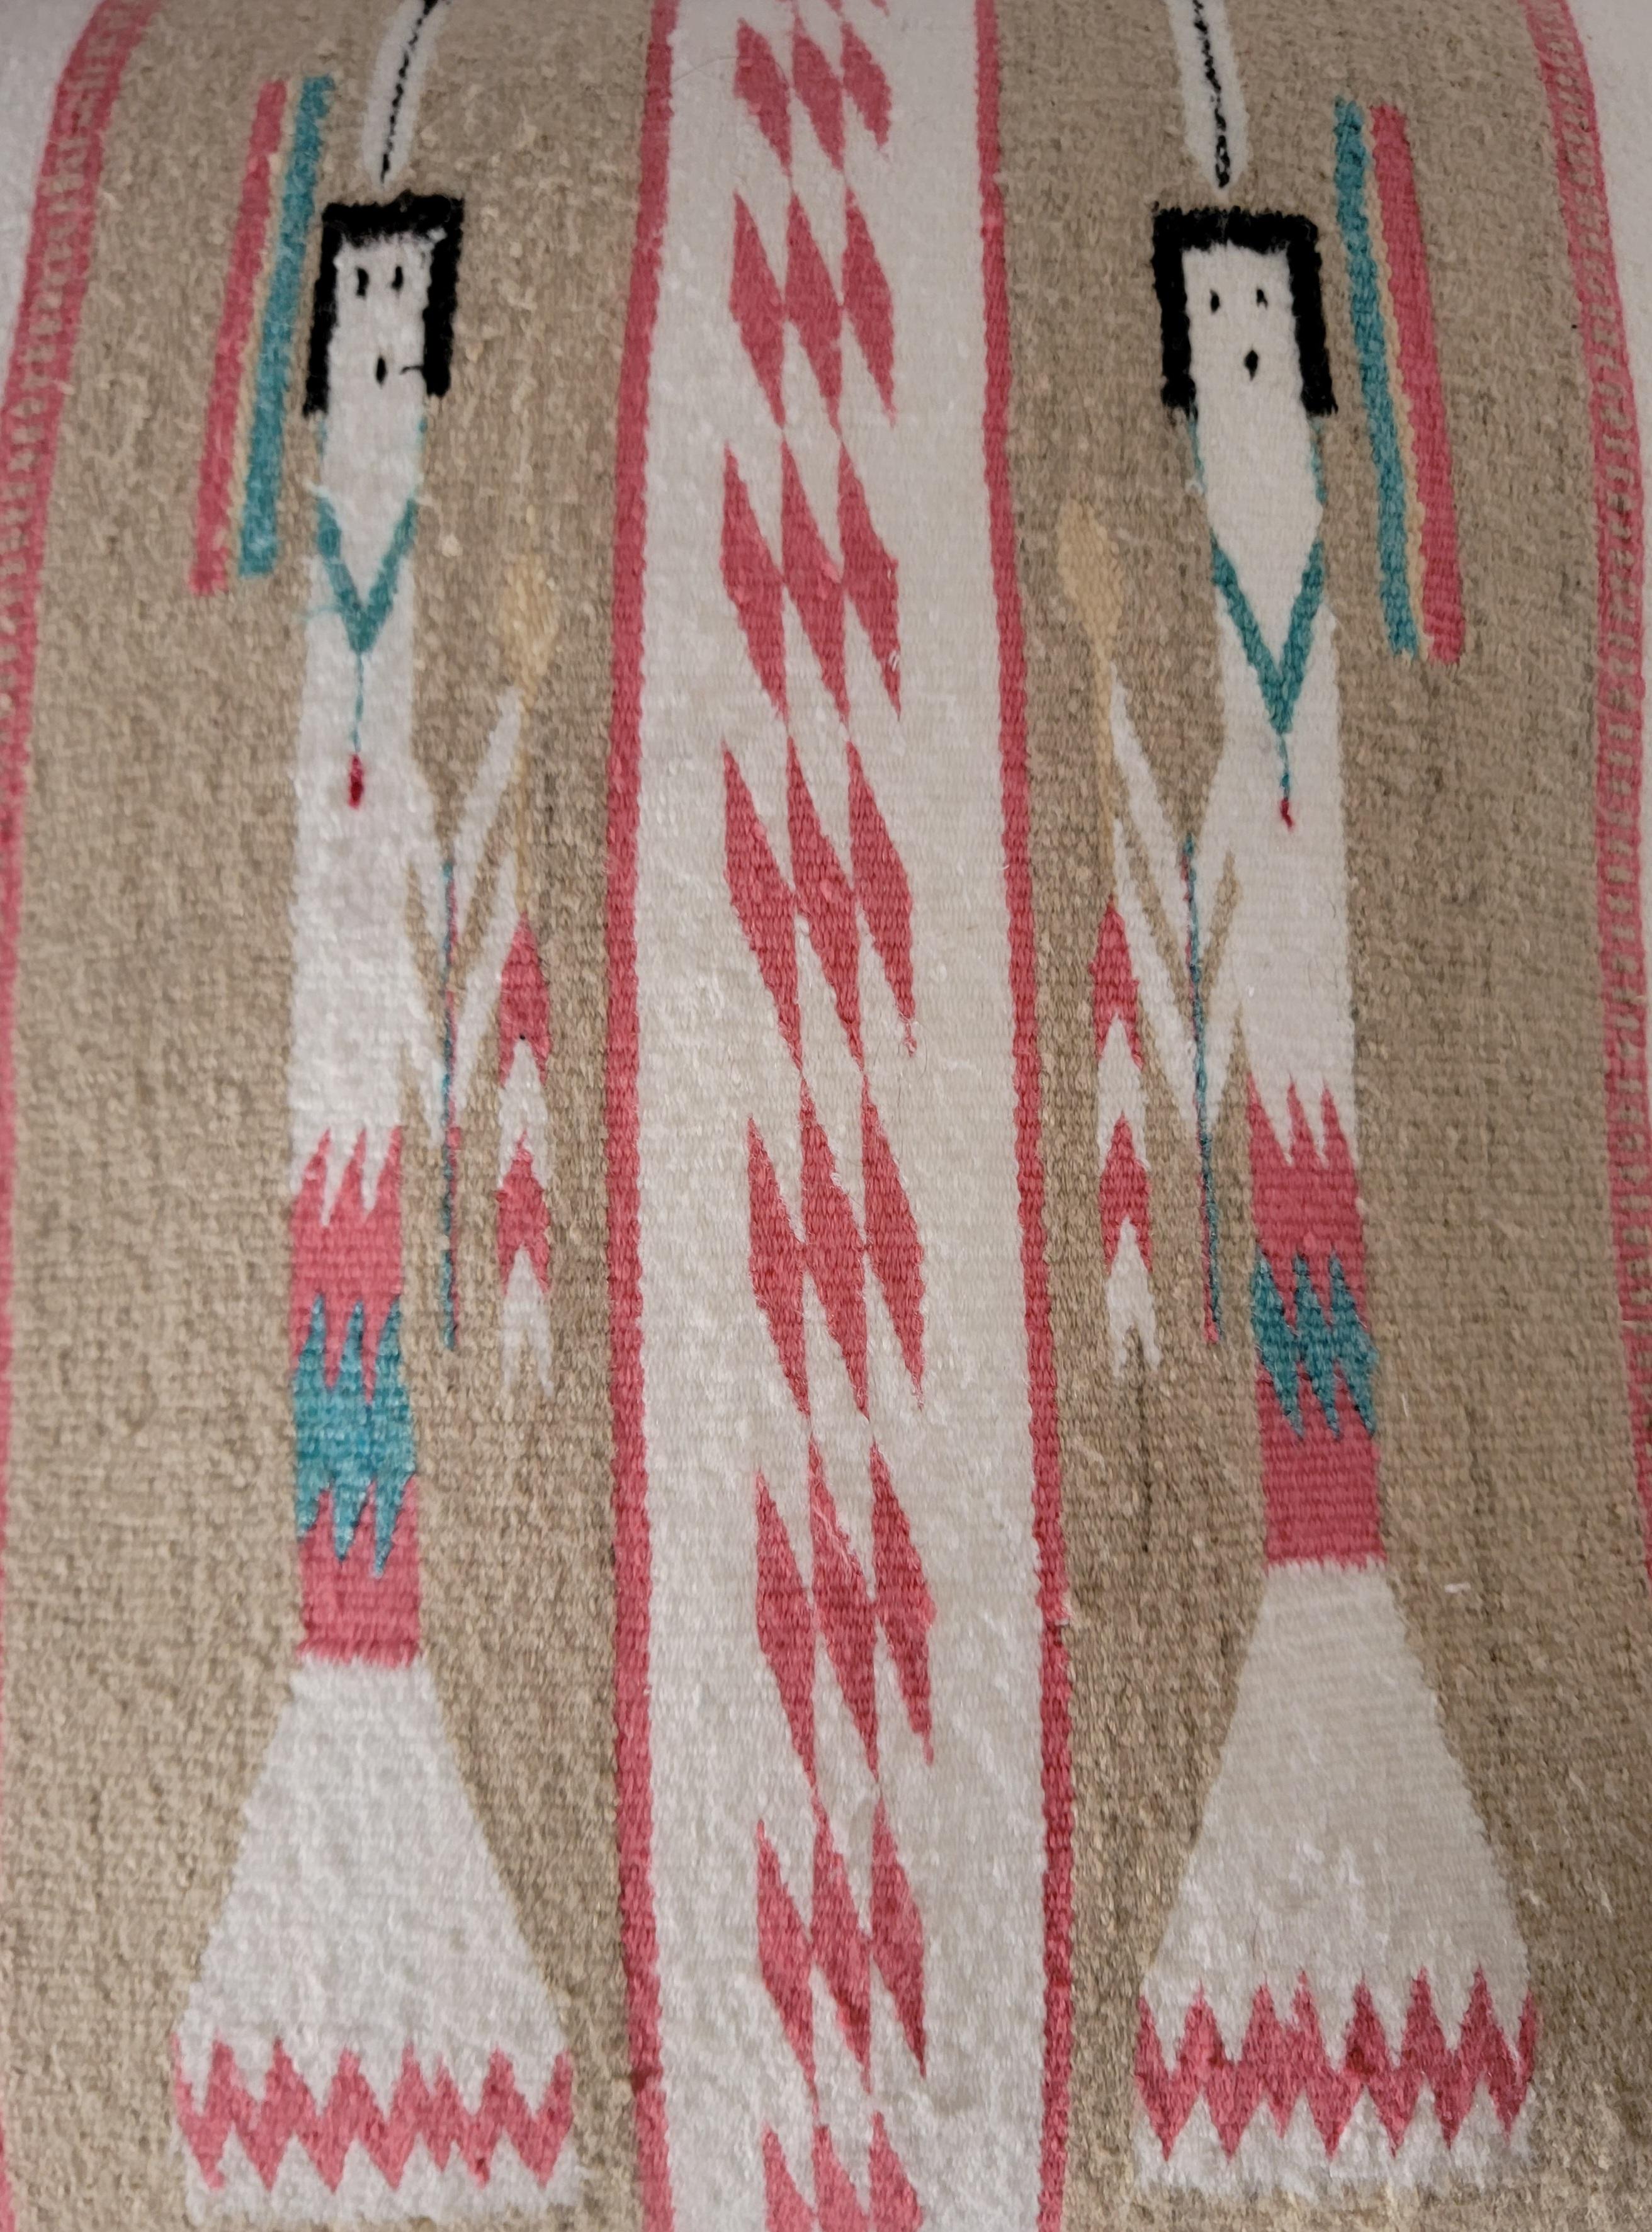 Very Large Yei Indian Weaving Pillow. White, Beige, Pink, Turquoise, and Black.
Feather and Down Insert.